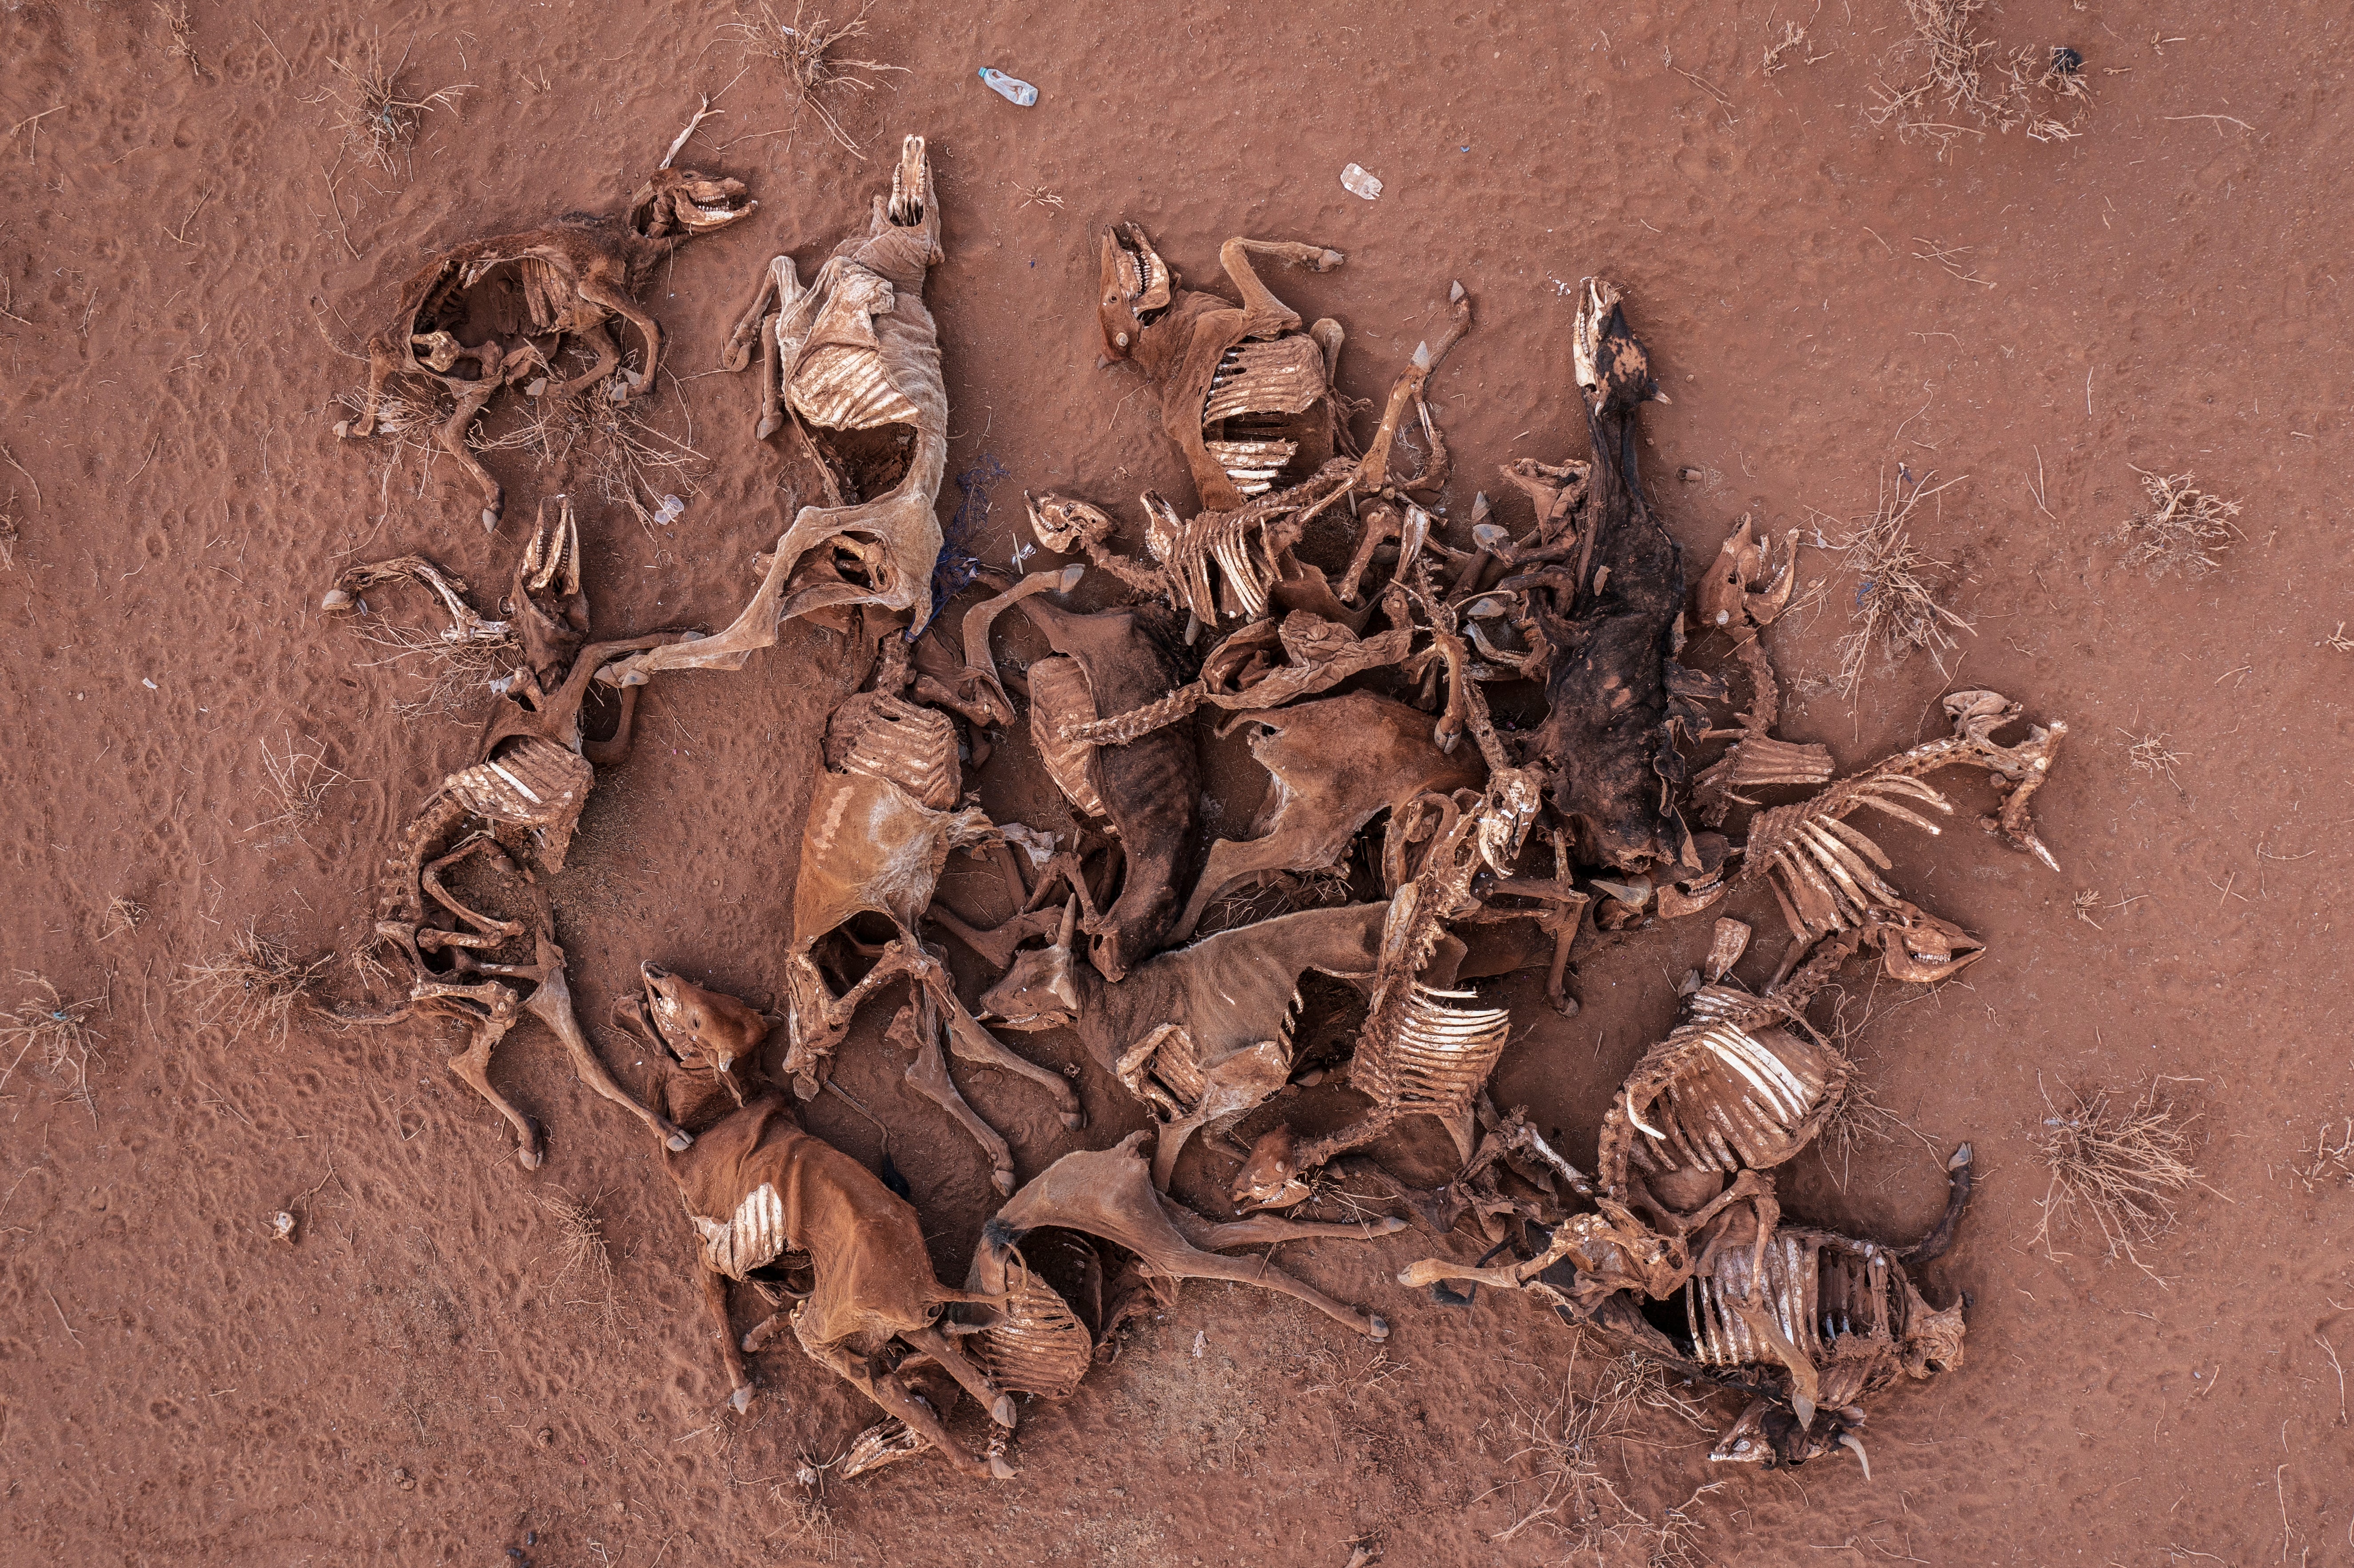 Skeletons of cows litter the landscape around the boma of Ormakau near Amboseli. Their owner, Moses Leyian started with 390 cows and now only has 43 left